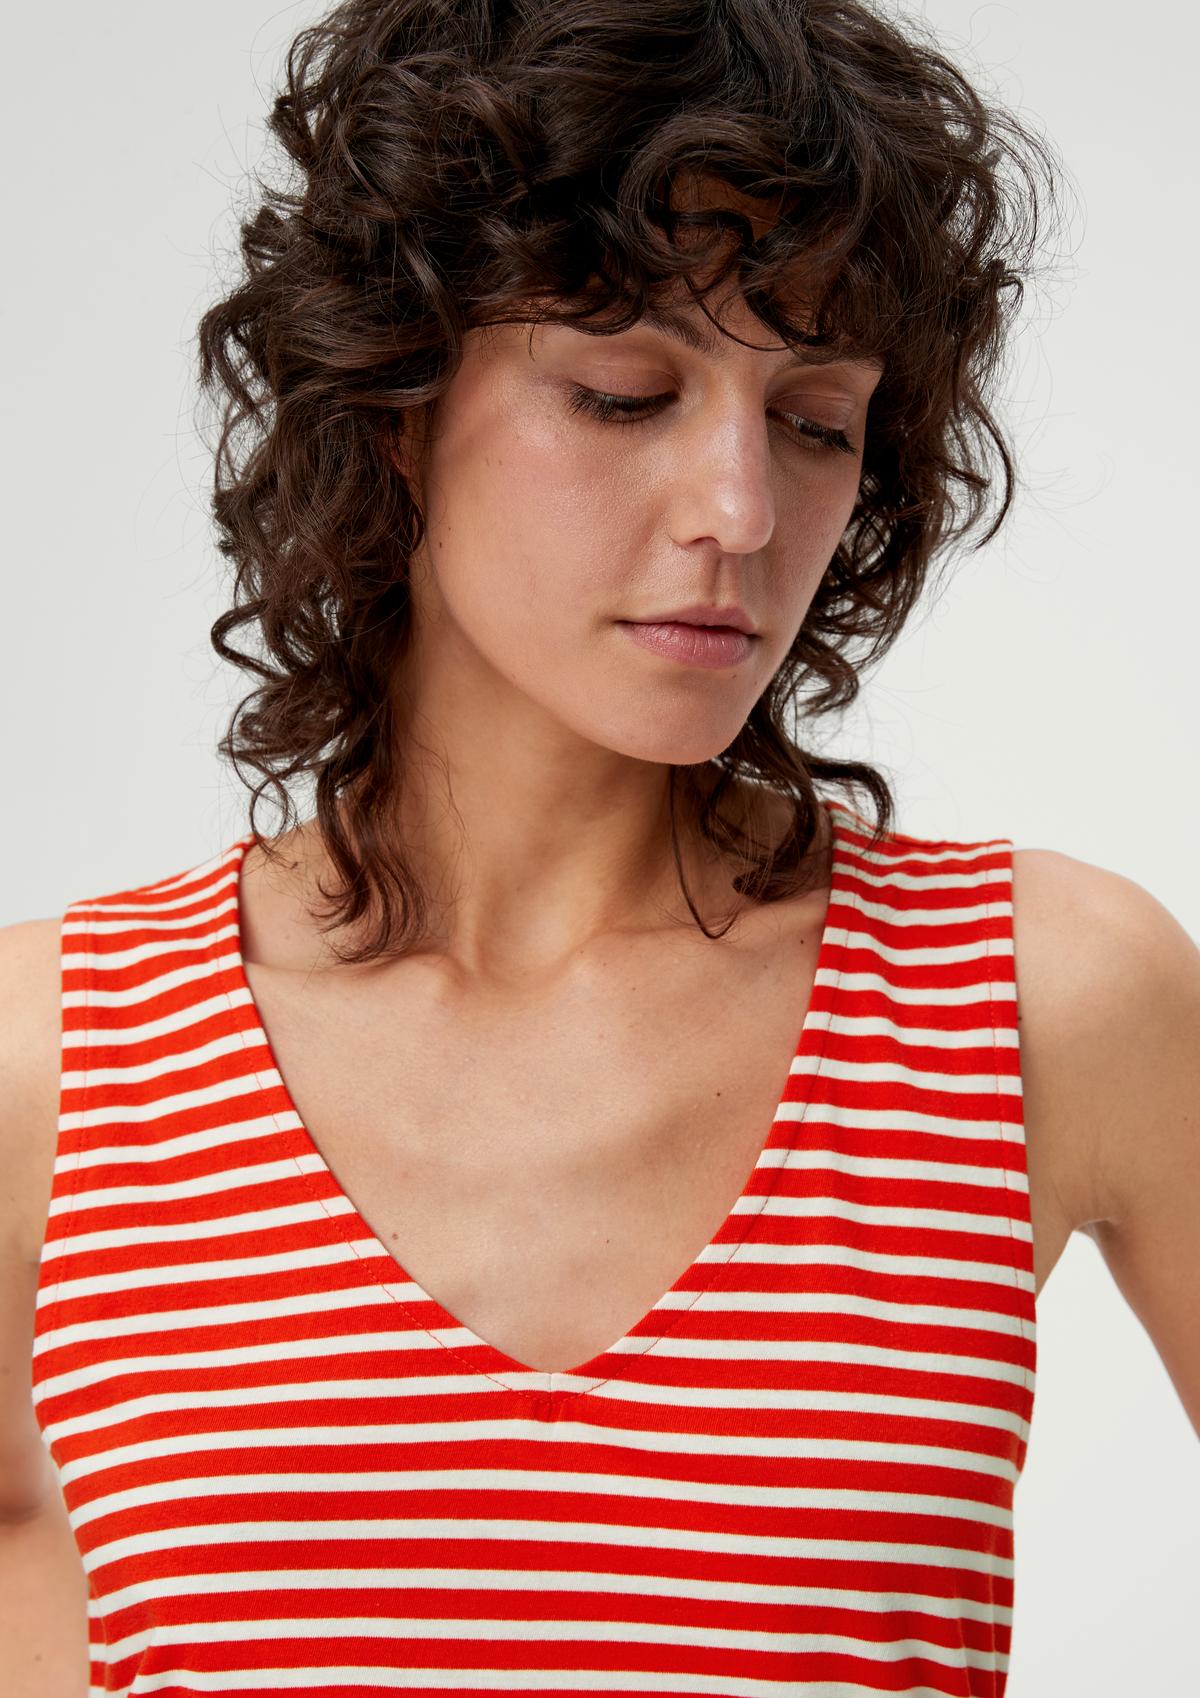 s.Oliver Sleeveless cotton top